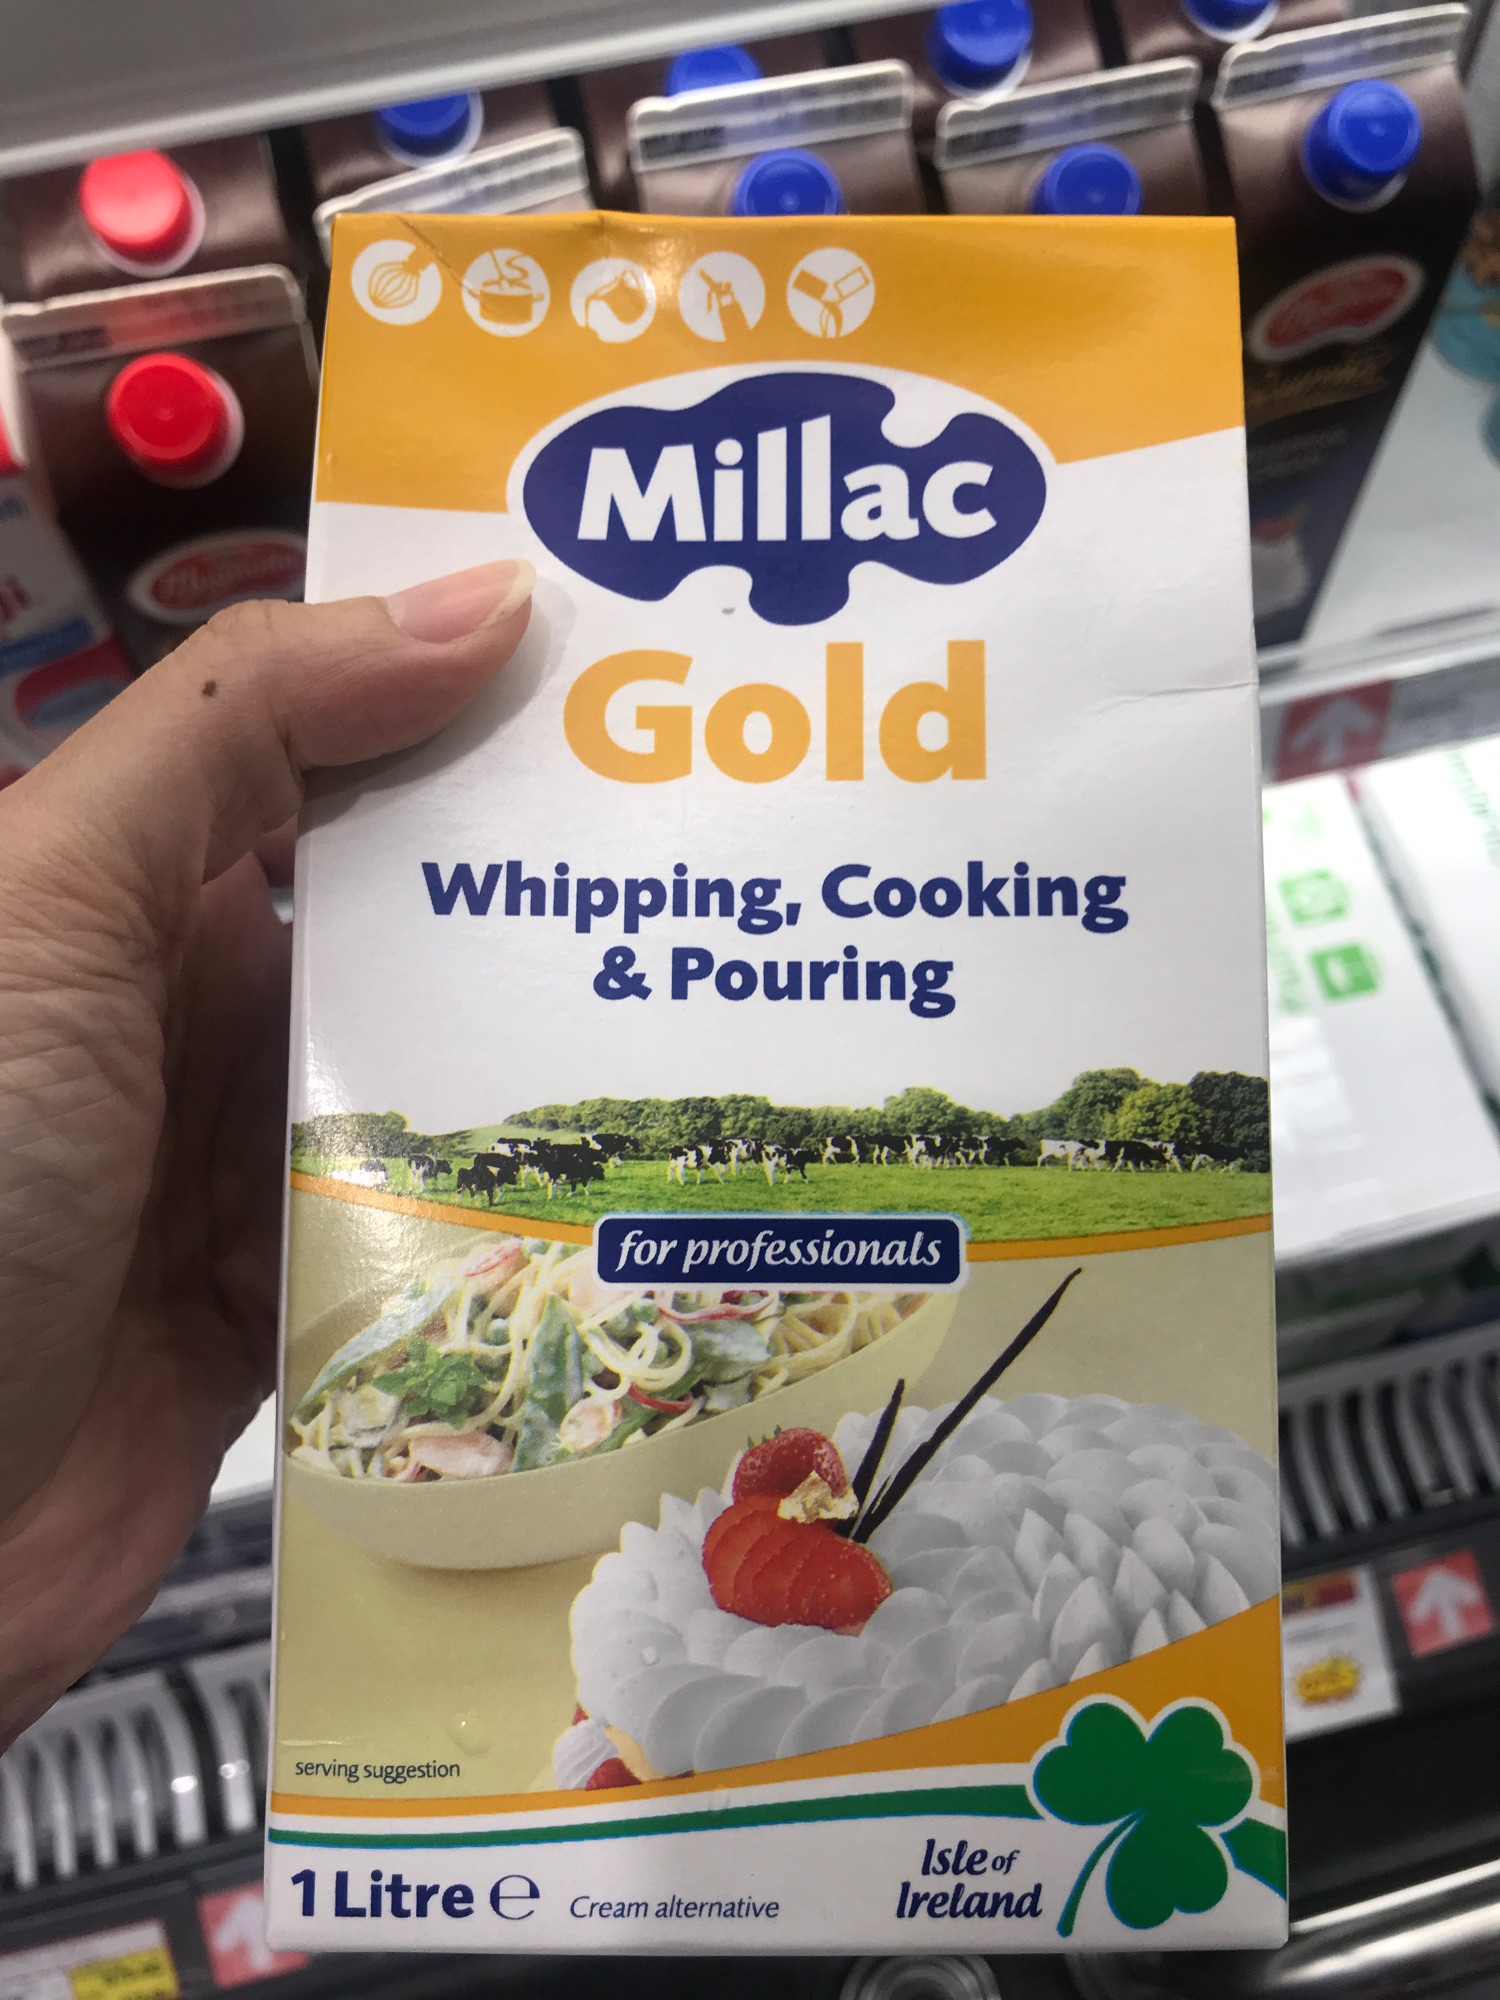 AMPM E-store ส่งความอร่อย Millac Gold whipping Cooking & Pouring 1 liter